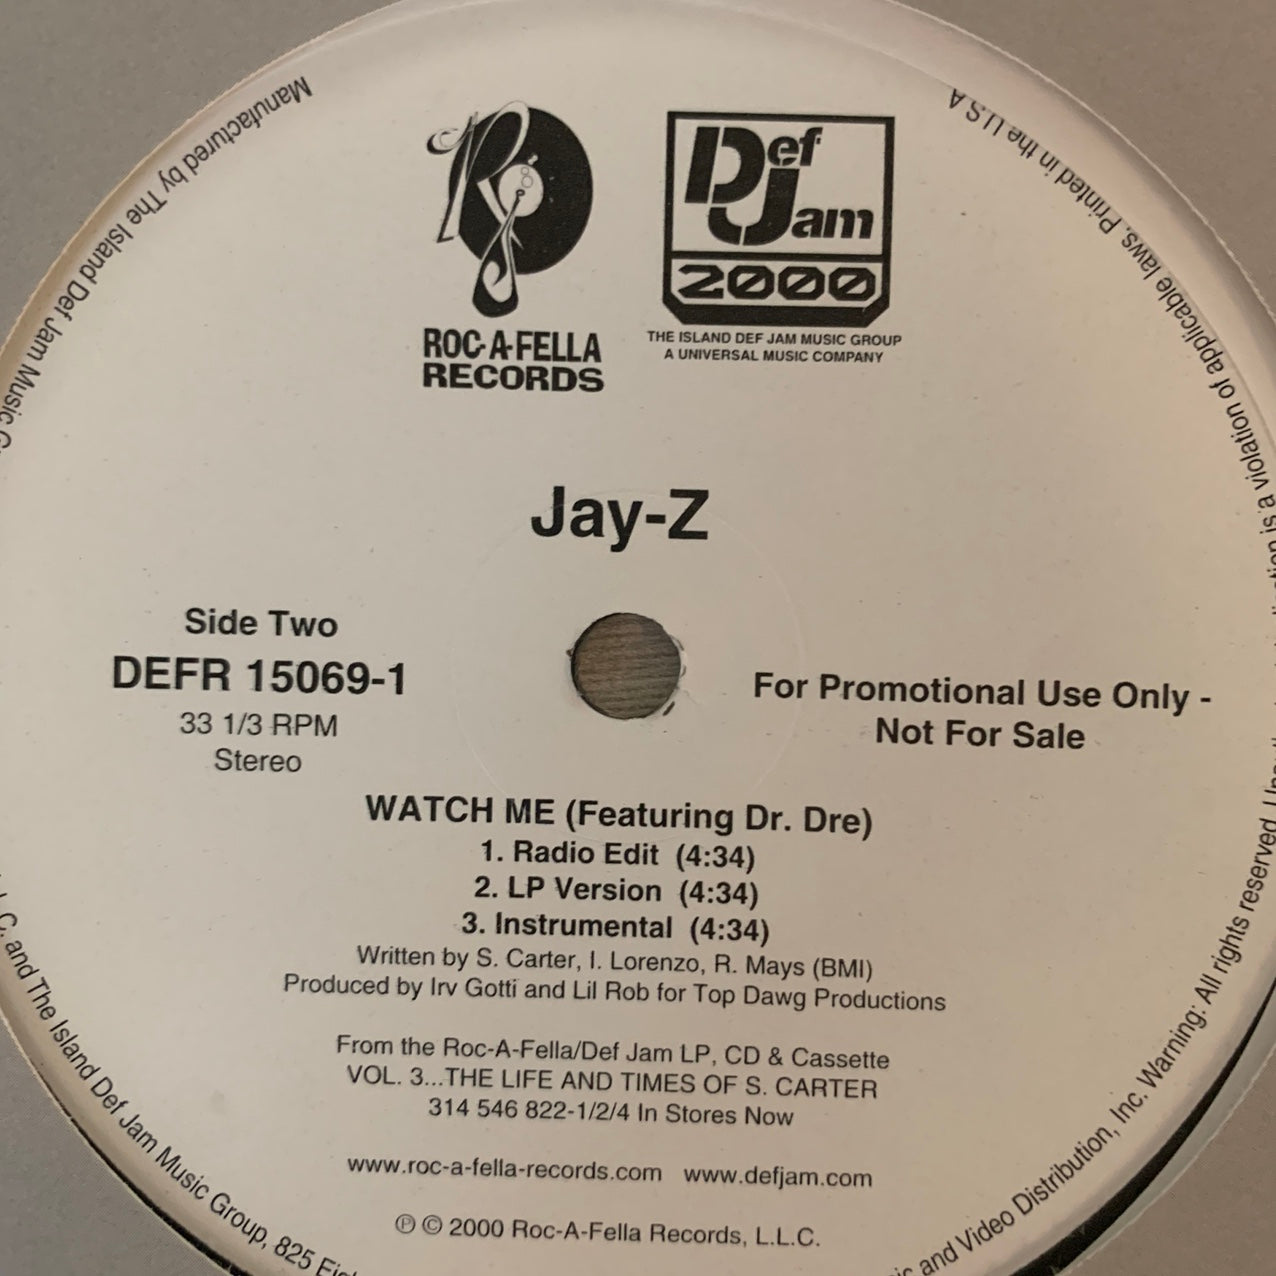 Jay-Z “Big Pimpin” / “Watch Me” Feat Dr Dre 6 Track 12inch Vinyl S